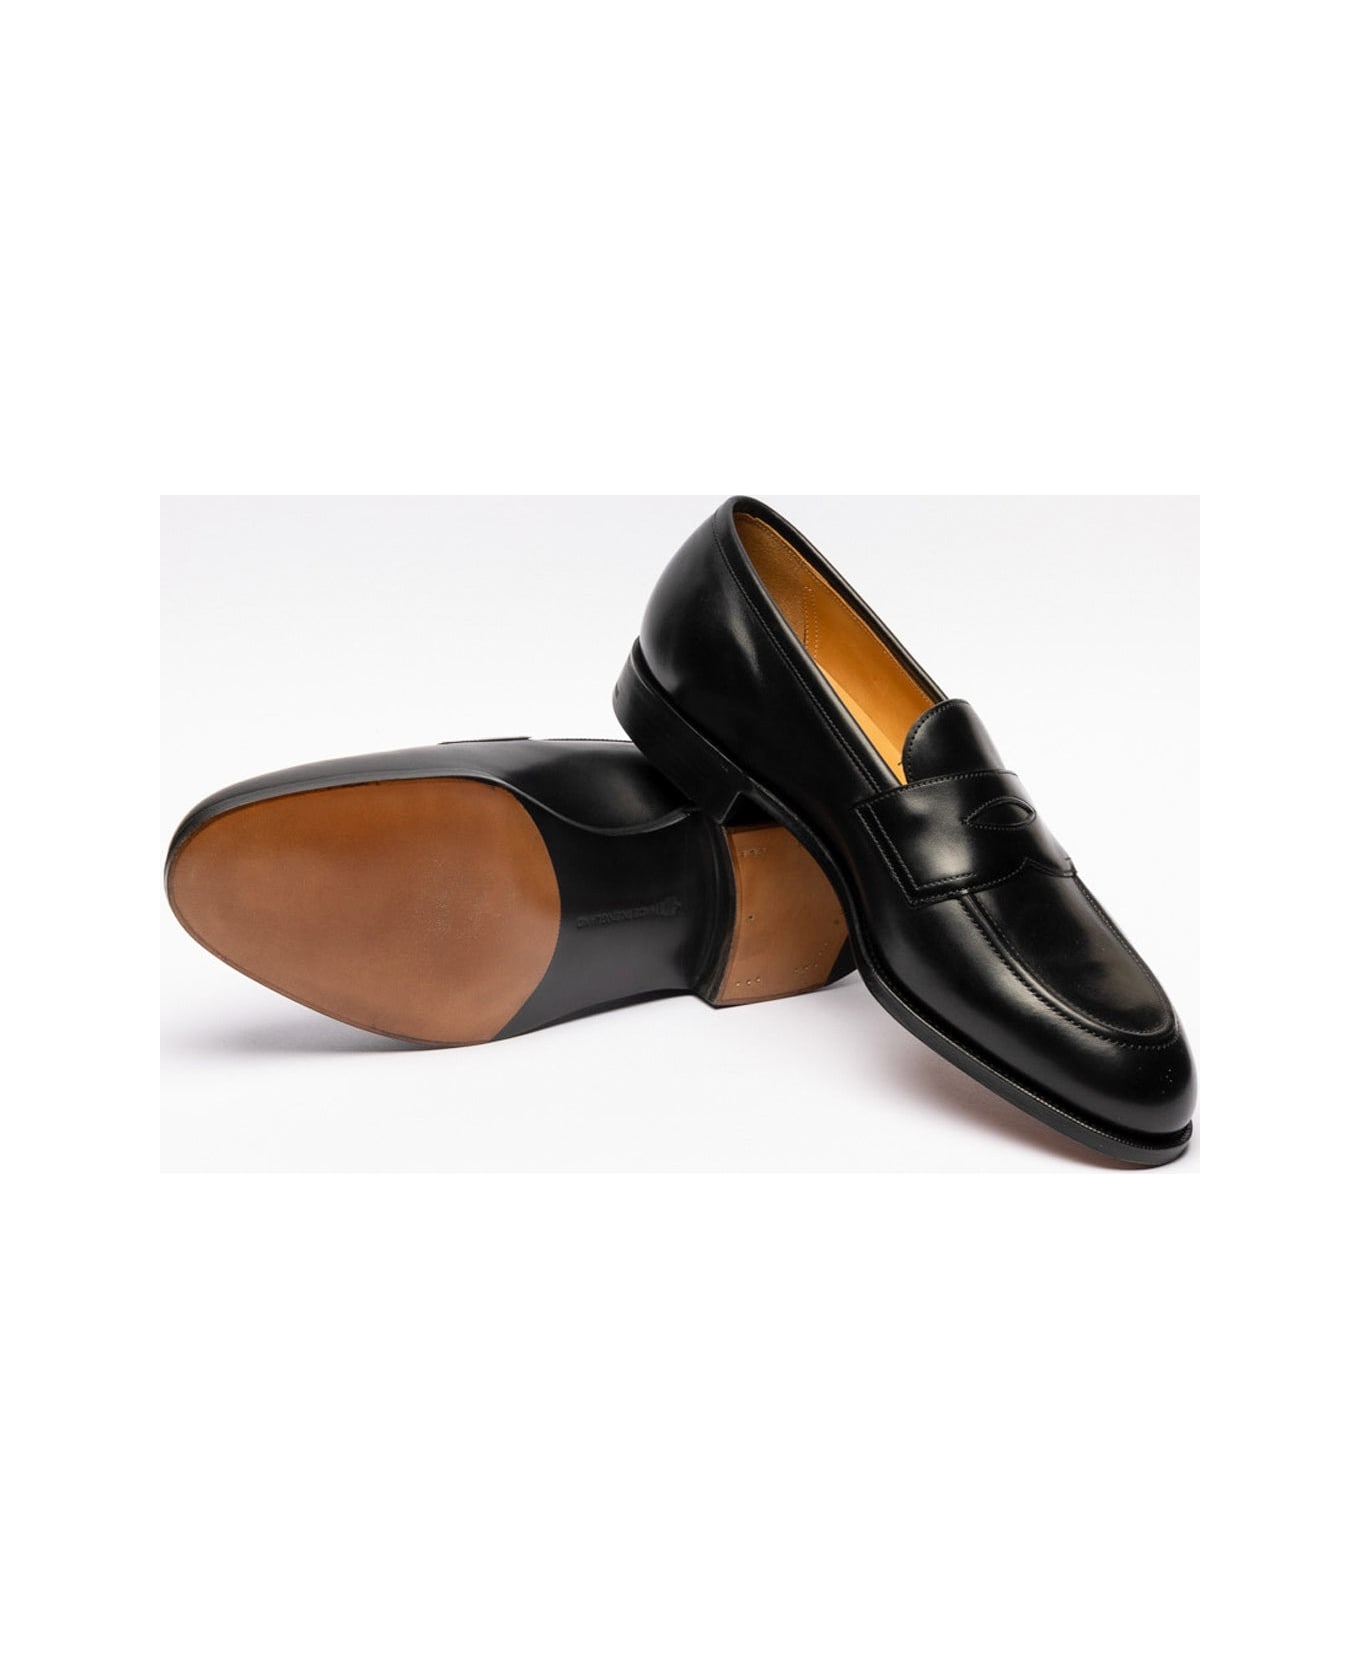 Edward Green Piccadilly Black Calf Penny Loafer - Nero